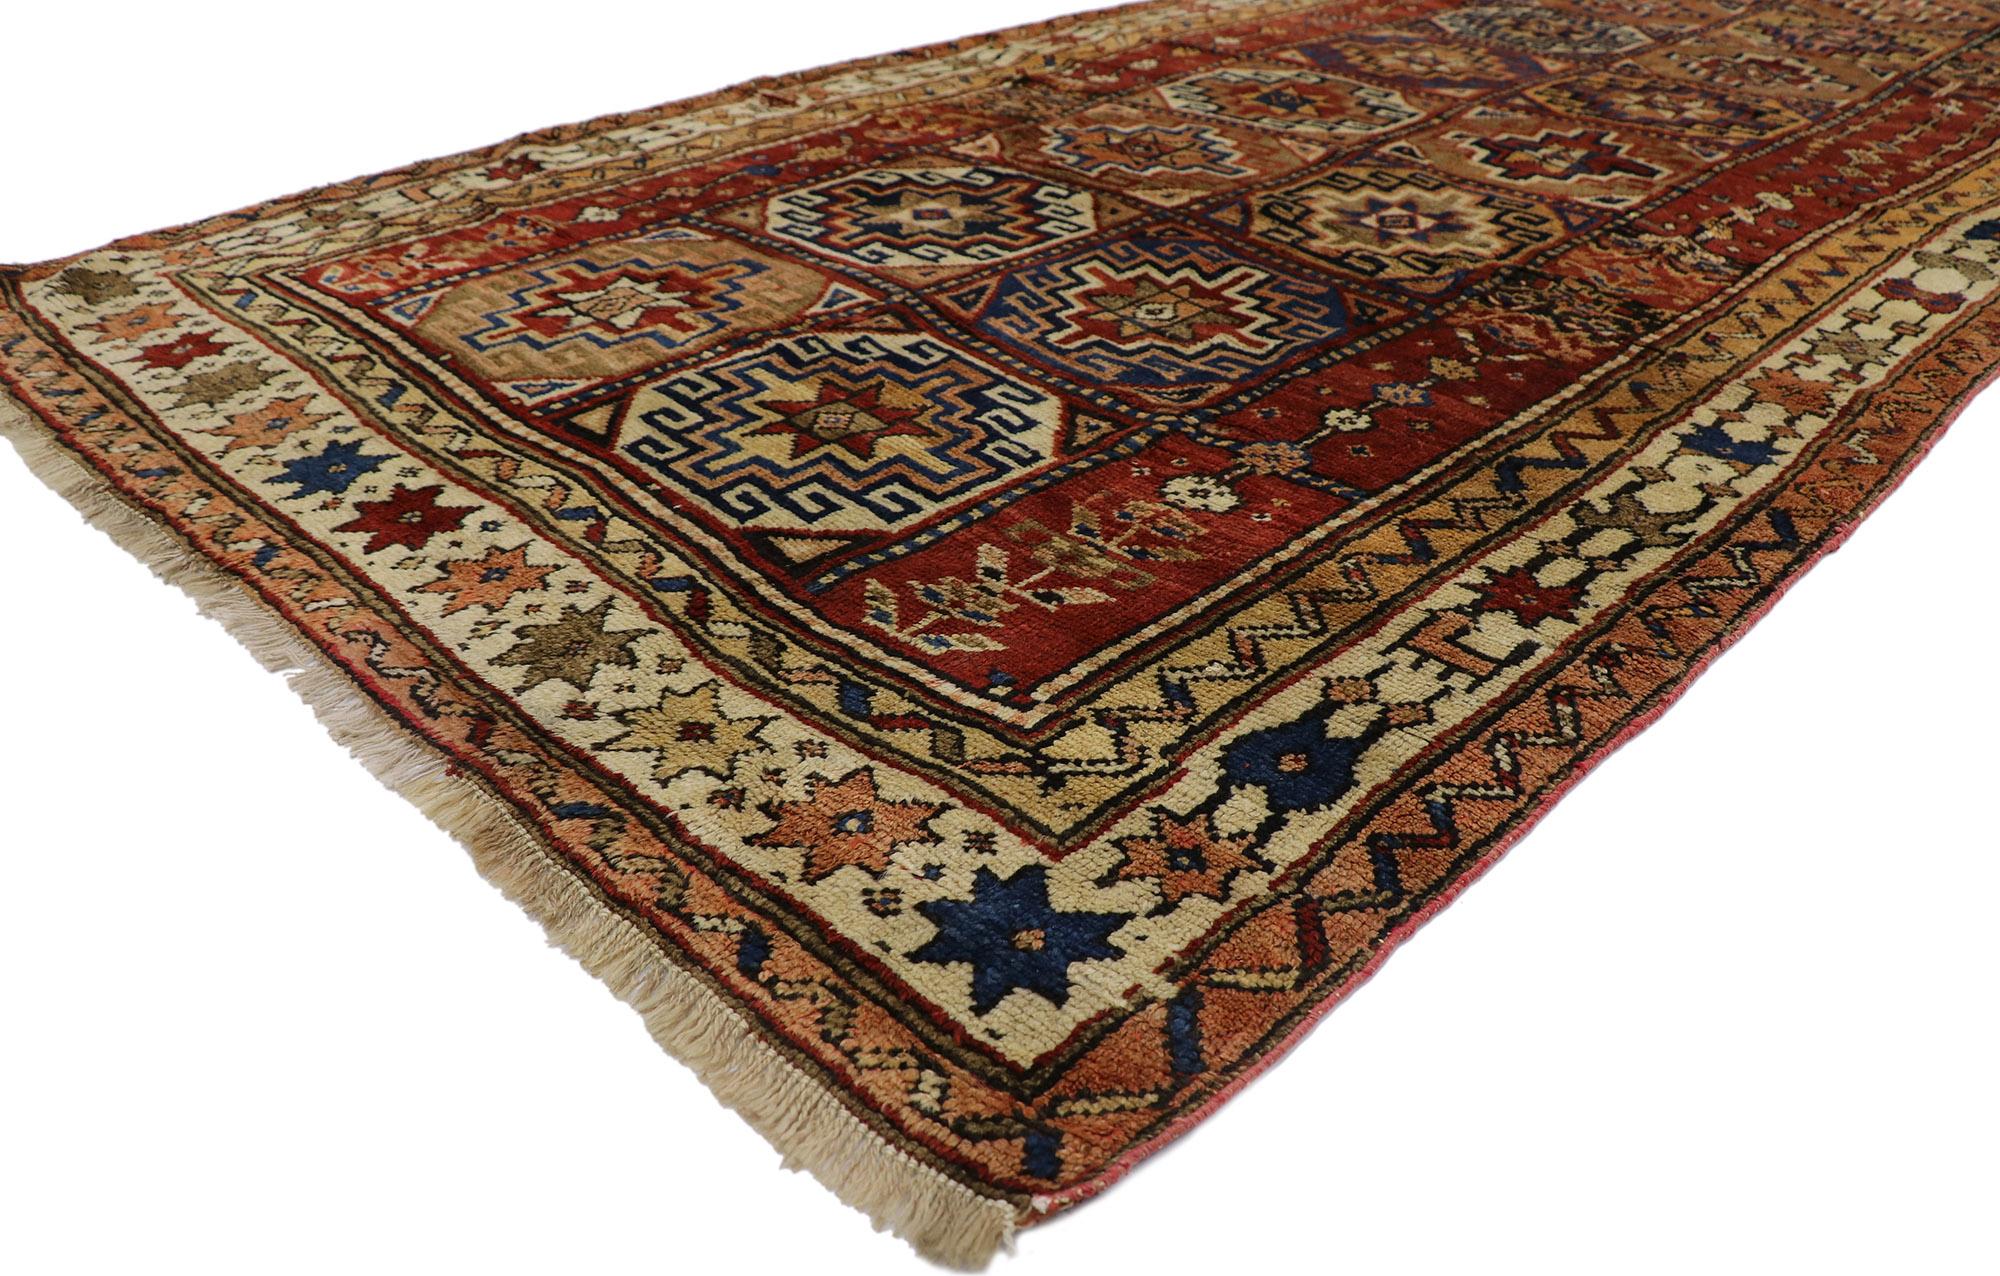 60927 Antique Karabagh Azerbaijan Gallery Rug with Memling Guls 05'03 x 11'00. Warm and inviting, this hand-knotted wool antique Karabagh Azerbaijan gallery rug emanates nomadic charm with a hint of sophistication. The abrashed field features an